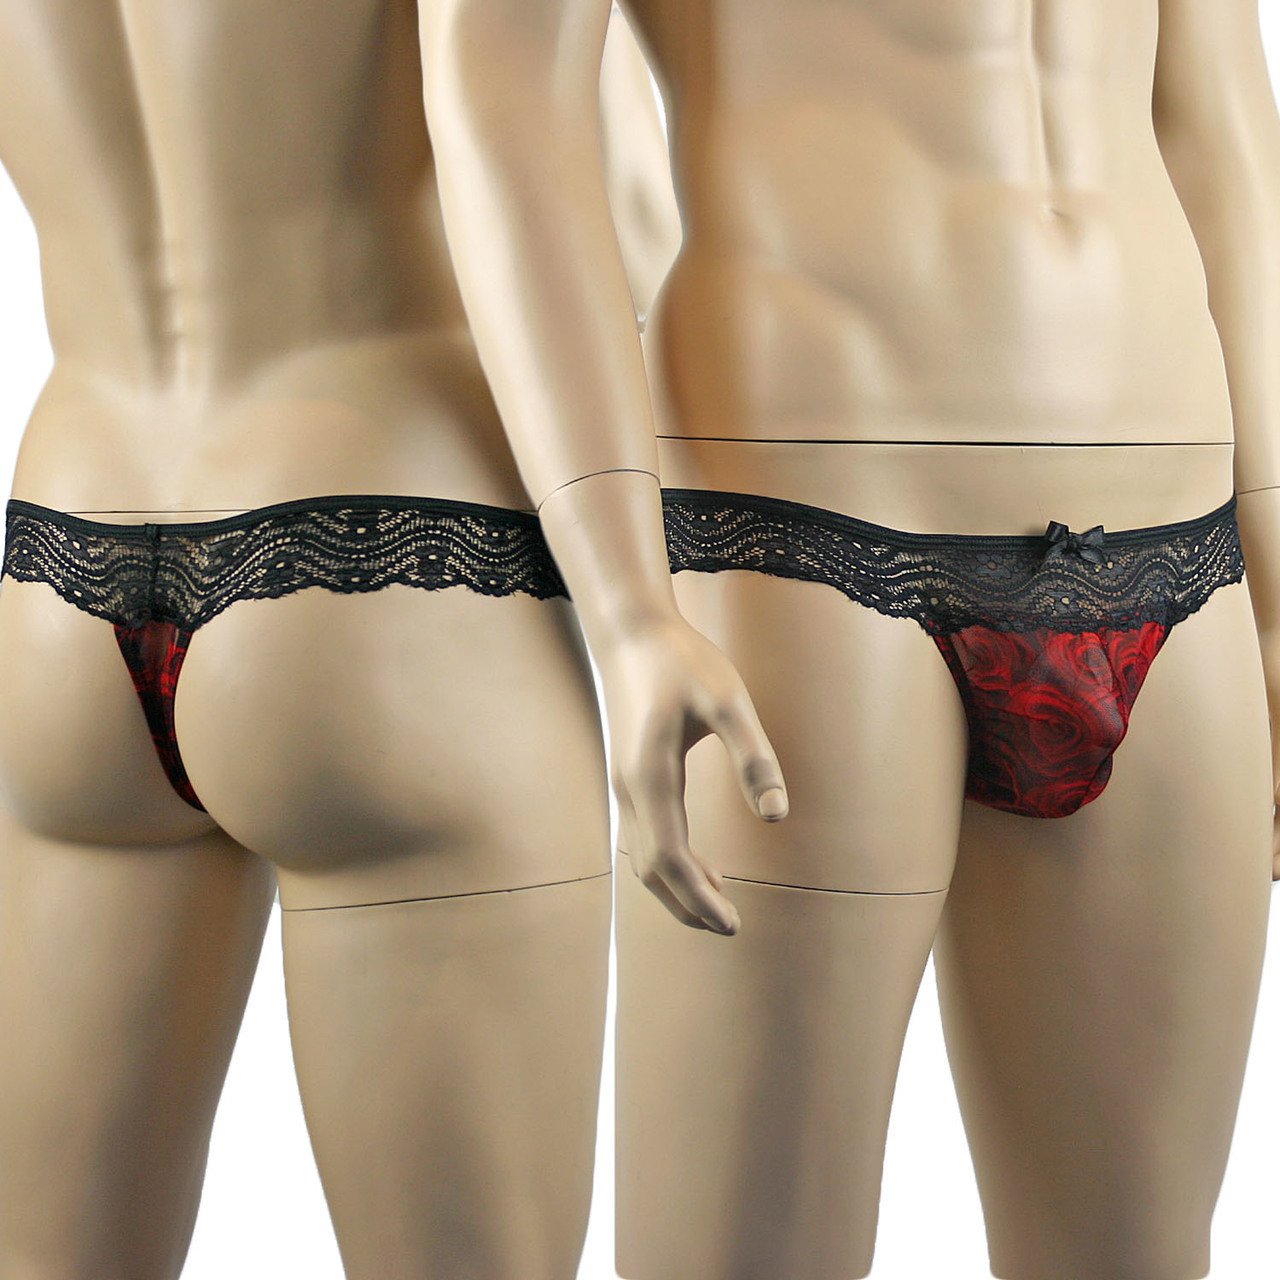 Mens Roses Thong, Sexy Sheer Lingerie Underwear Red Black